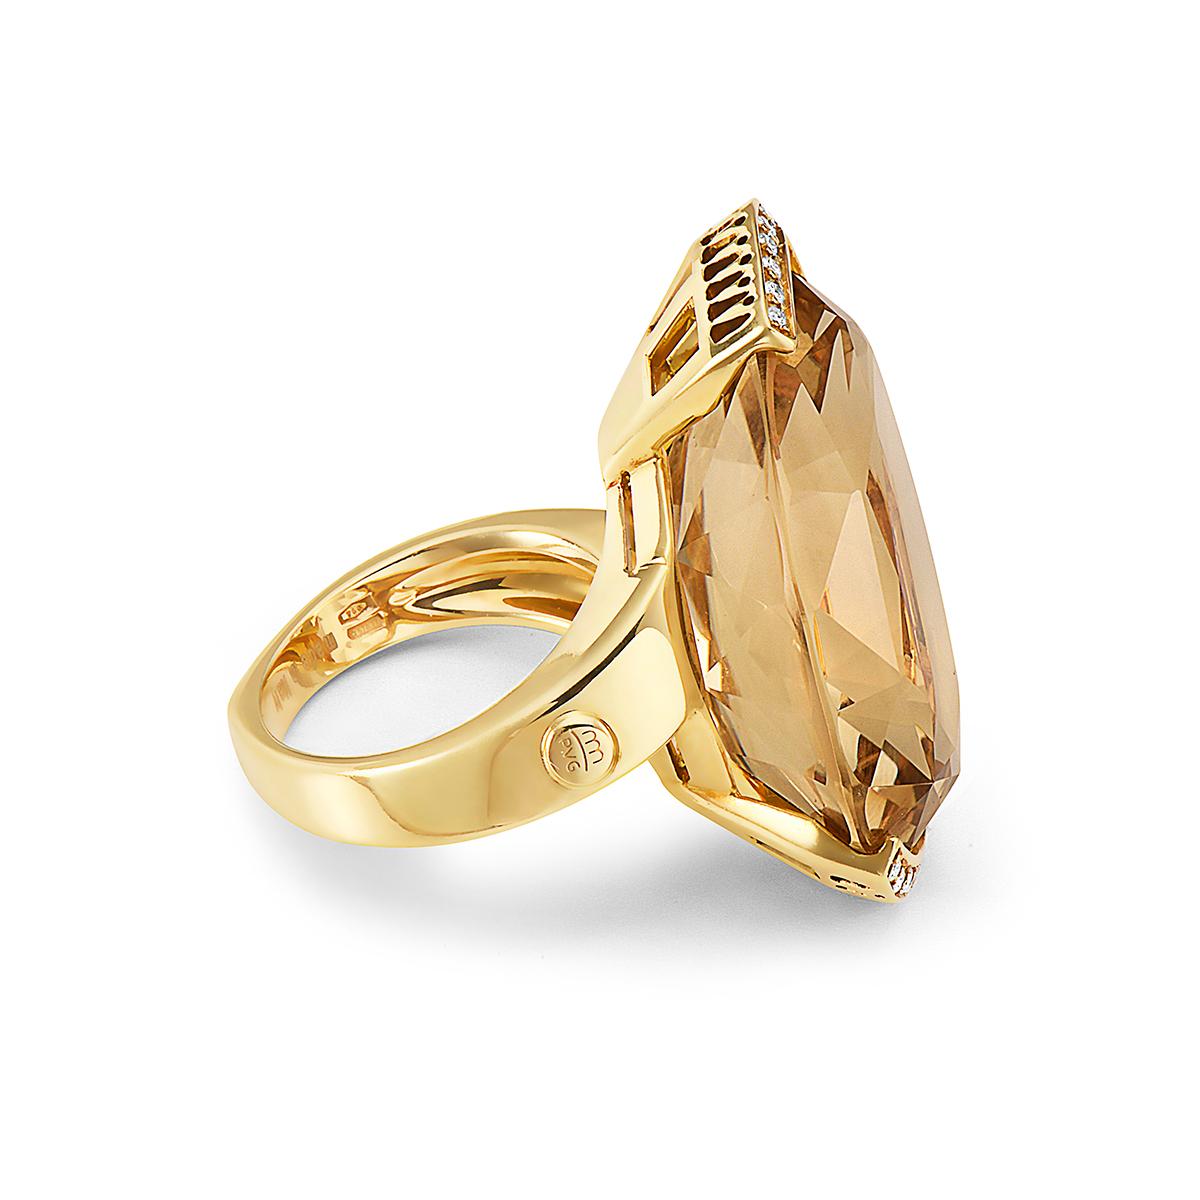 This 18K yellow gold Ponte Vecchio Gioielli cocktail ring features a 45.10 carat faceted pear shape citrine and 0.14 carats of round brilliant cut diamonds. Size 7.25. Made in Italy. Signed PVG.
Stone Count: 16
Marks: 750, Designer Signature,